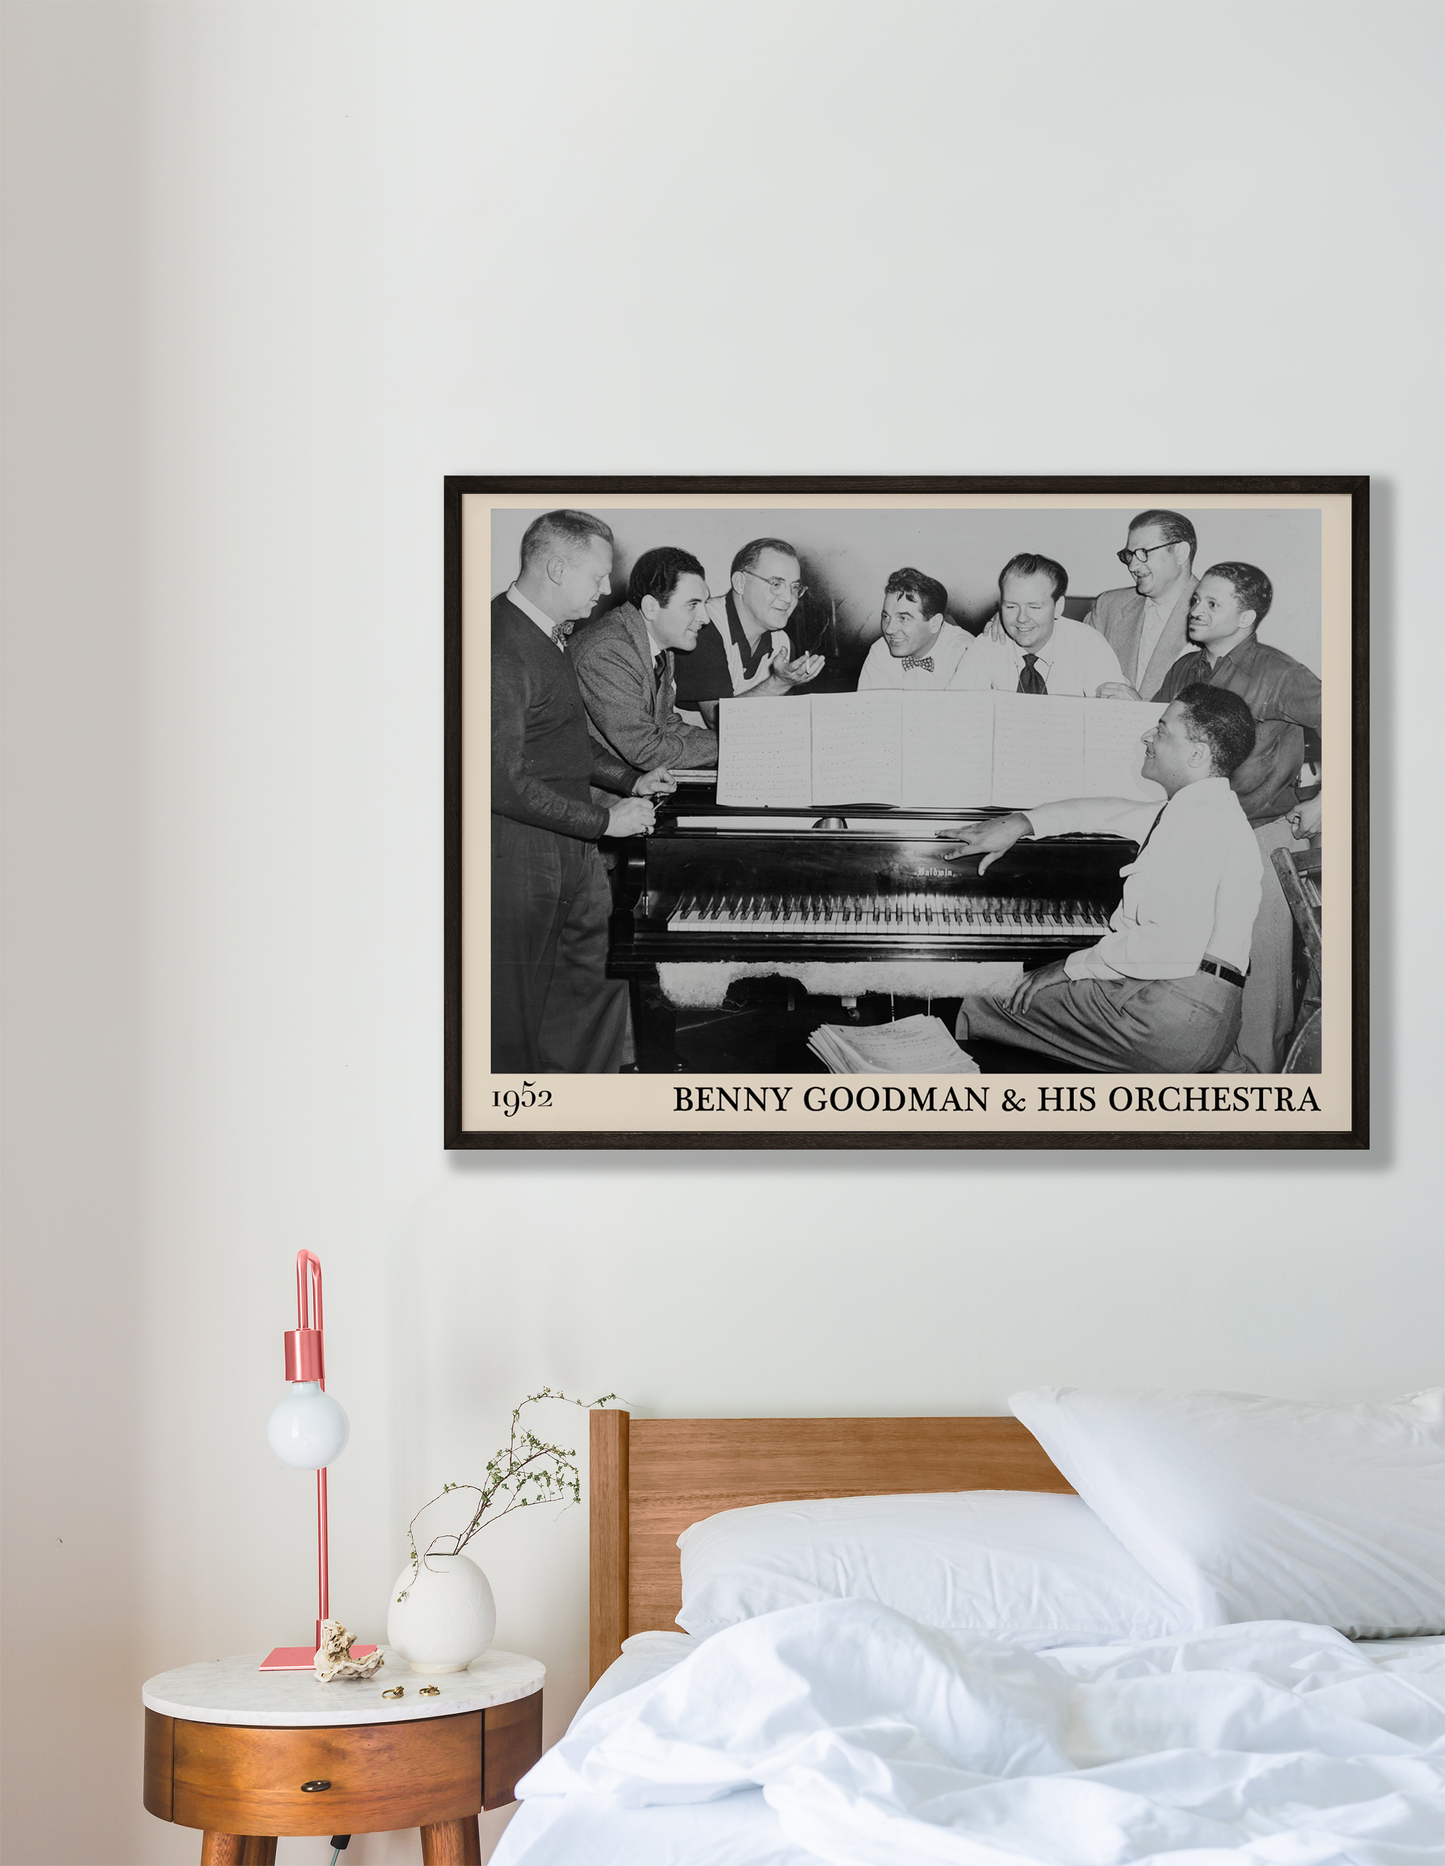 1952 photograph of Benny Goodman & his orchestra crafted into a cool black framed art poster. The poster is hanging on a white bedroom wall